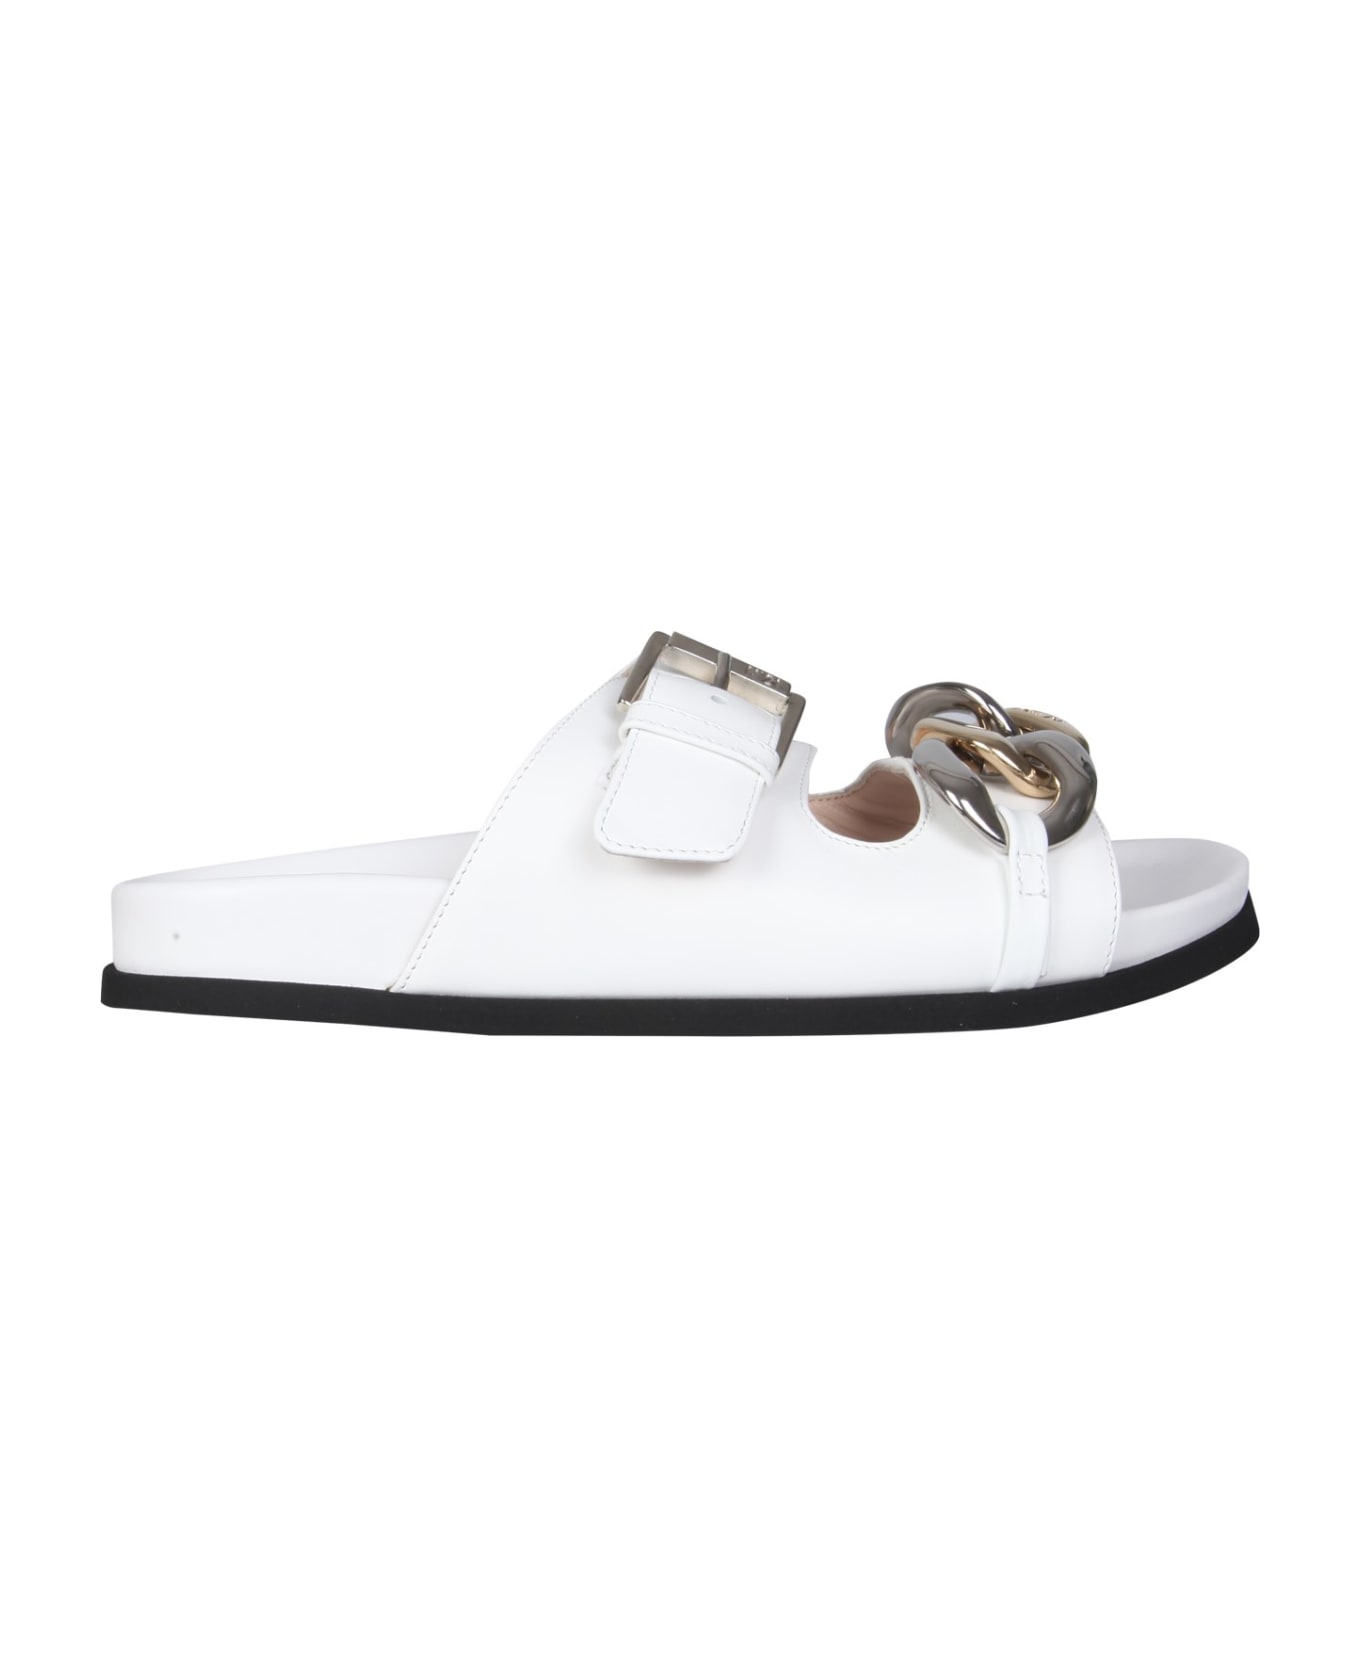 N.21 Sandals With Oversized Chain - BIANCO